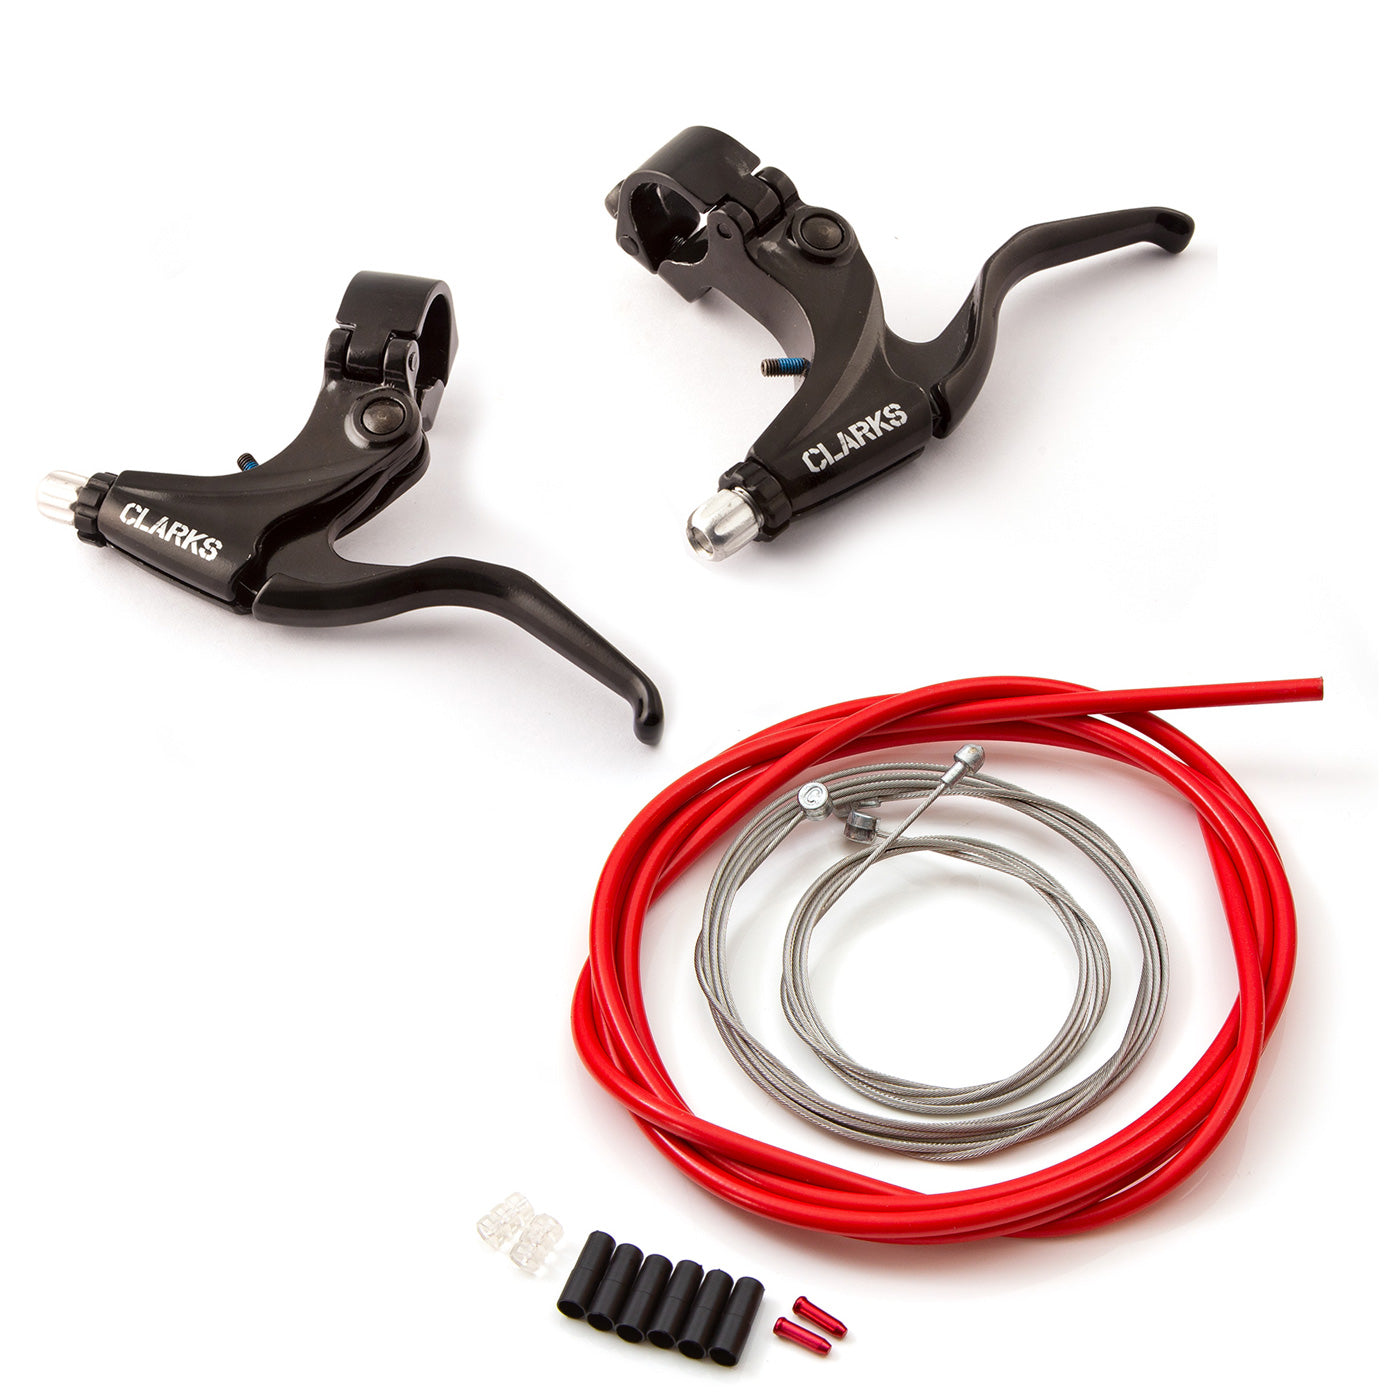 View Clarks VBrake levers with brake cable kit information